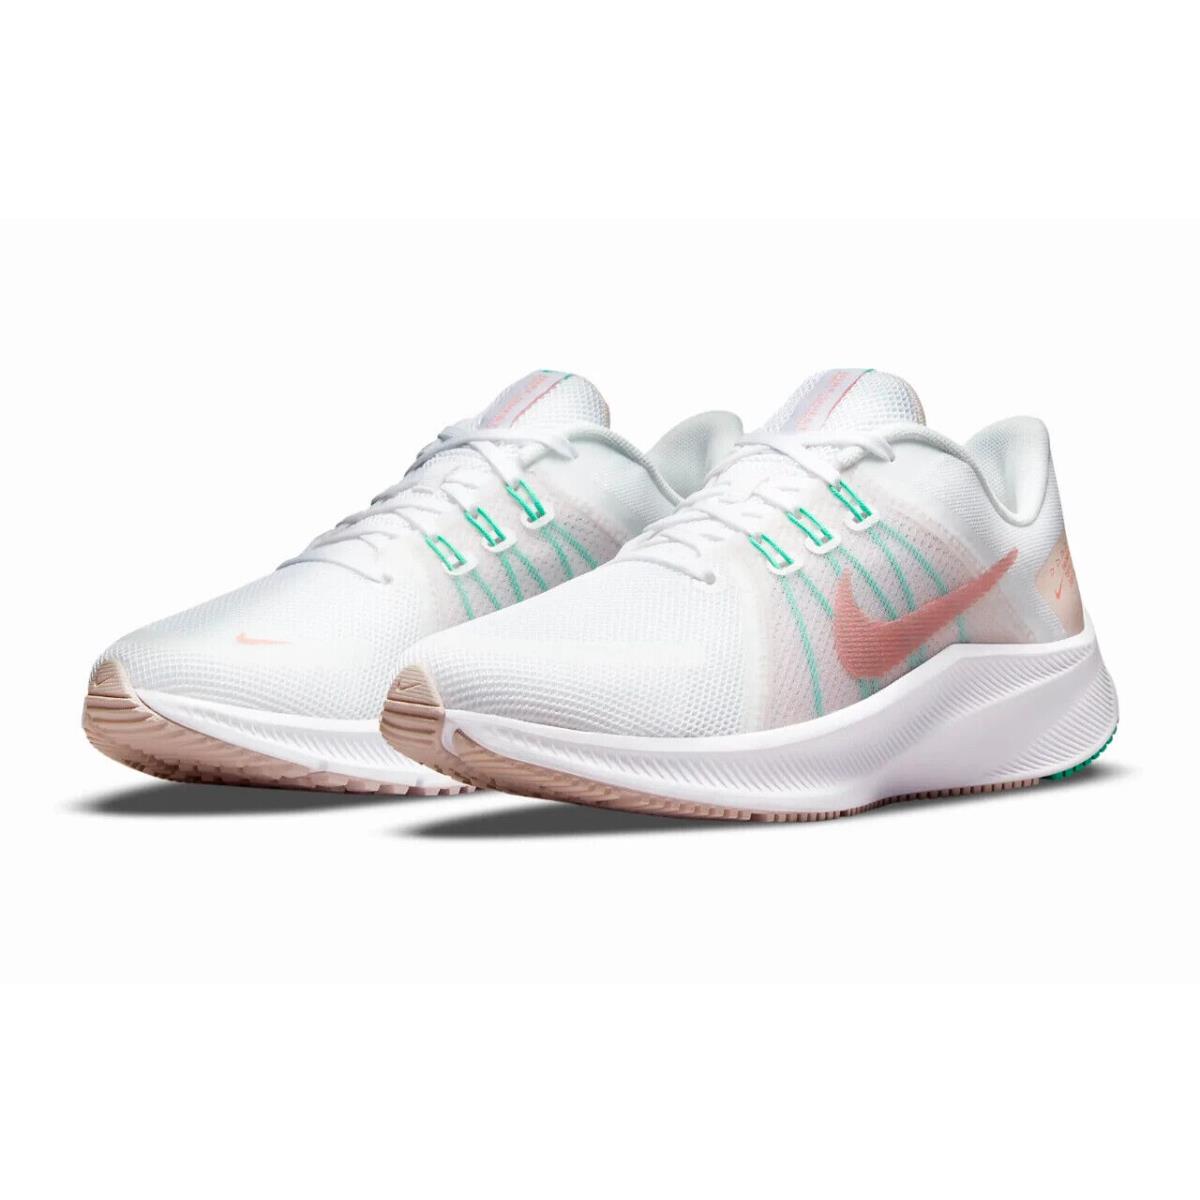 Nike Quest 4 Womens Size 11.5 Shoes DA1106 105 White Pink Green